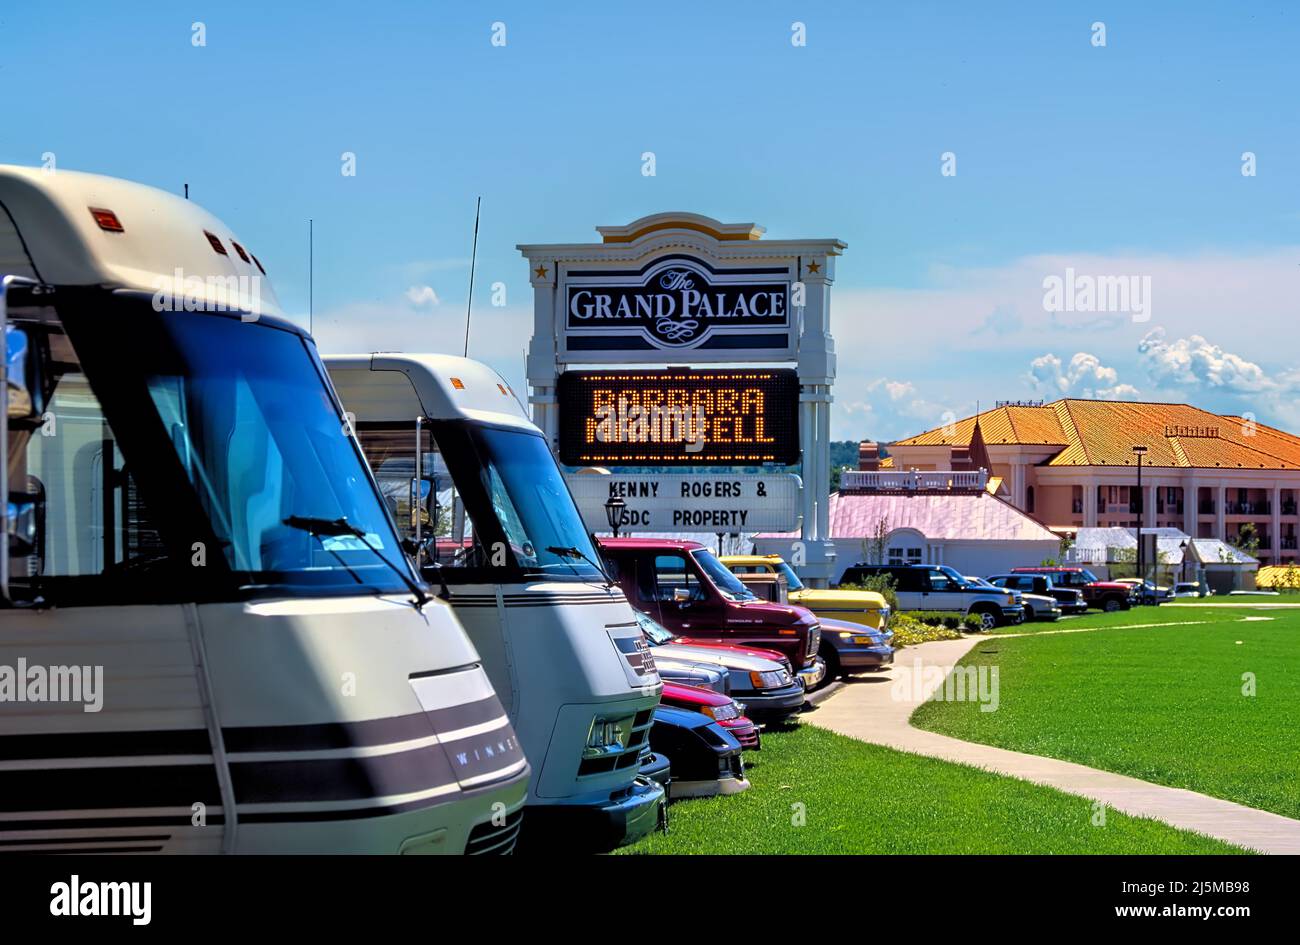 Branson, Missouri, USA October 24, 1992: RVs and mobile homes line the parking lot at The Grand Palace during a performance by Barbara Mandrell. Stock Photo